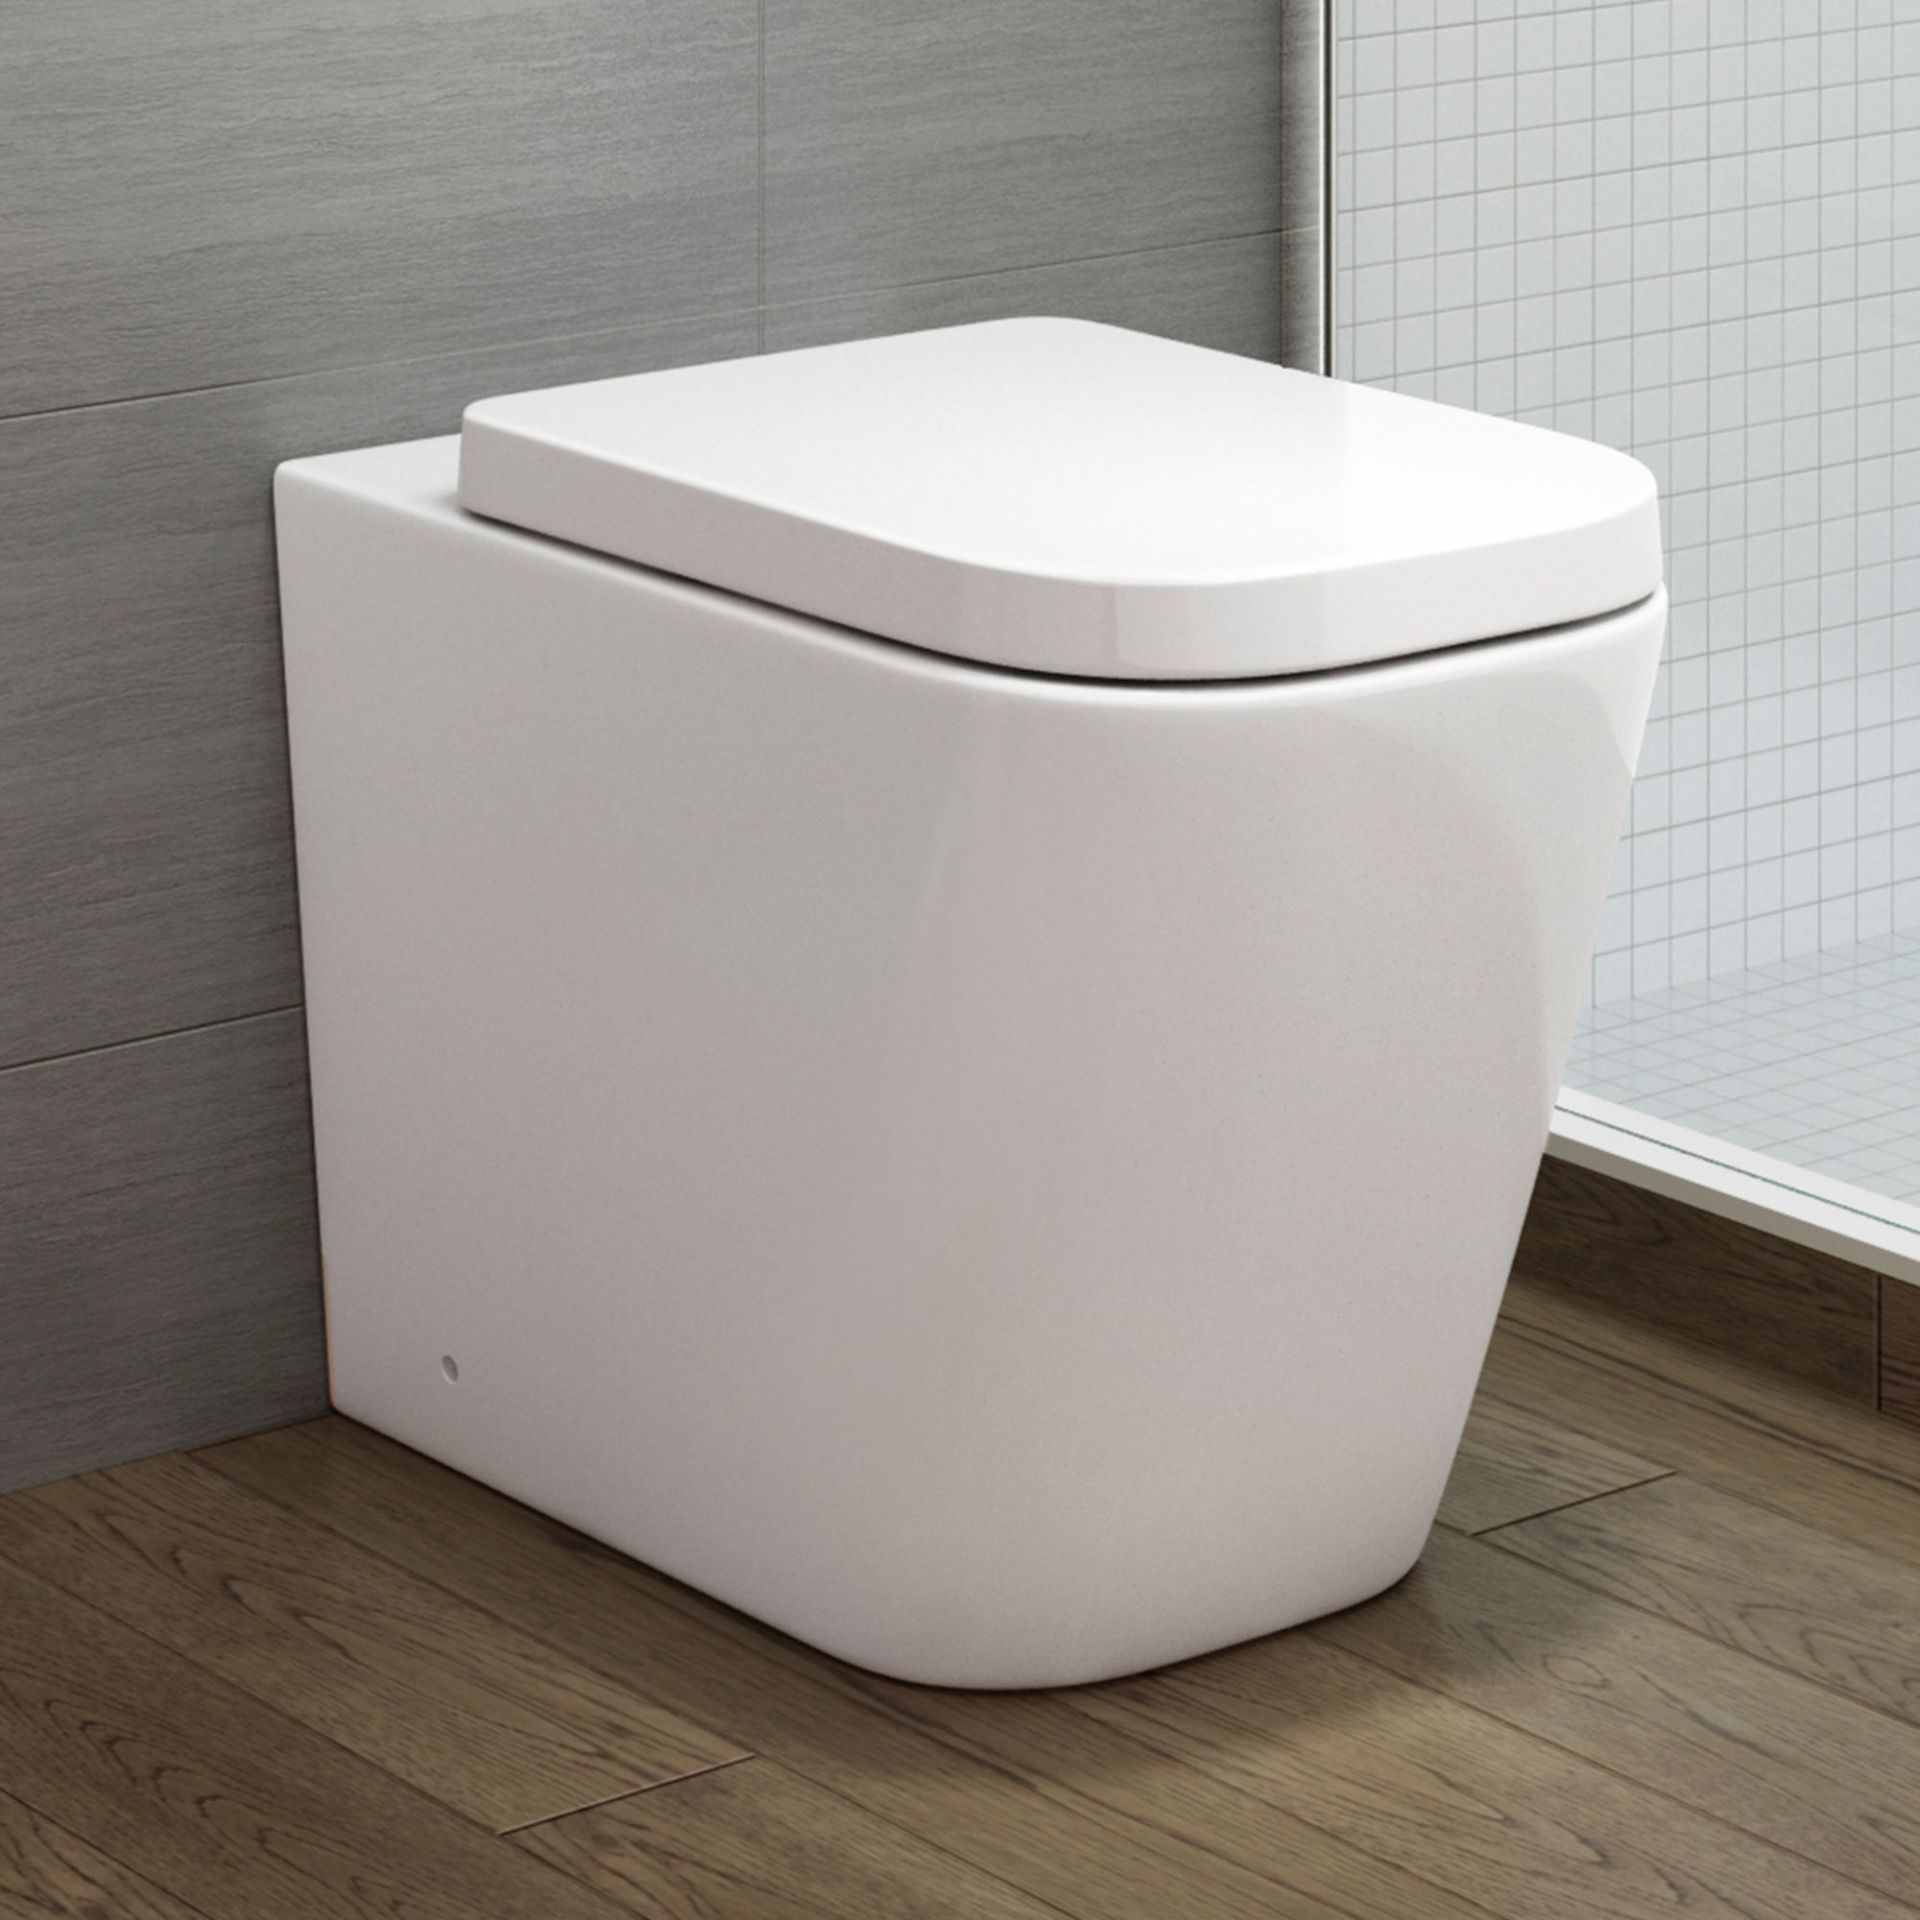 Florence Rimless Back to Wall Toilet inc Luxury Soft Close Seat. Rimless design makes it easy t...